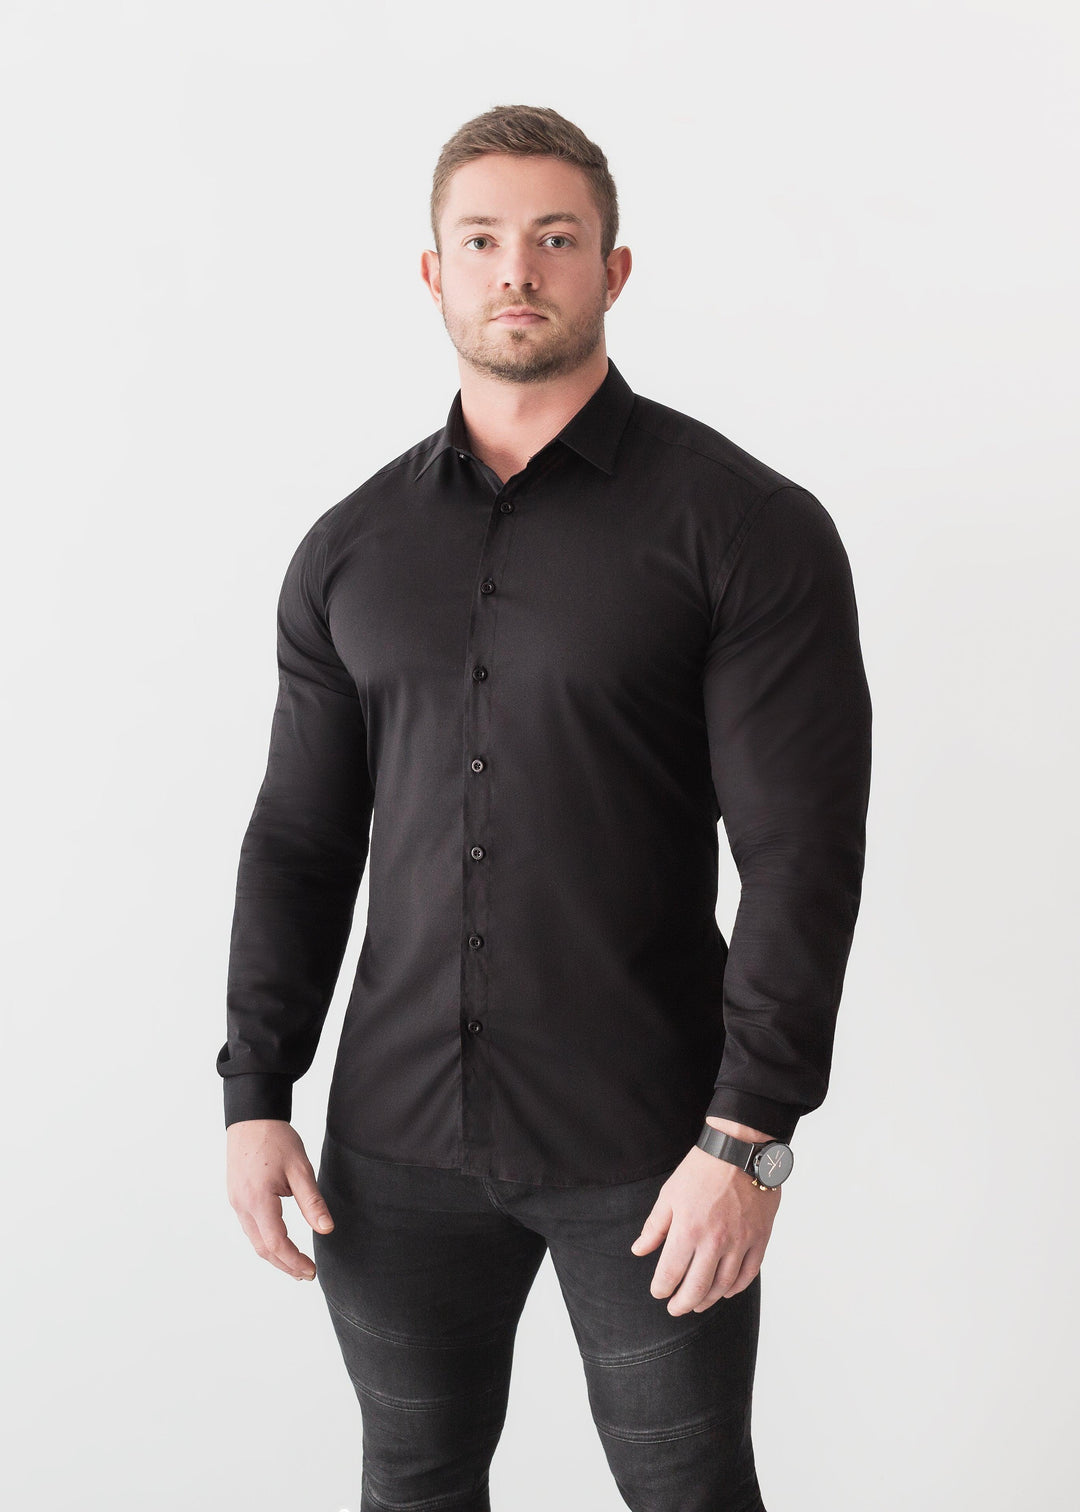 Black Tapered Fit Shirt For Men. A Proportionally Fitted and Comfortable Muscle Fit Shirt. Best Shirts For a Muscular Build